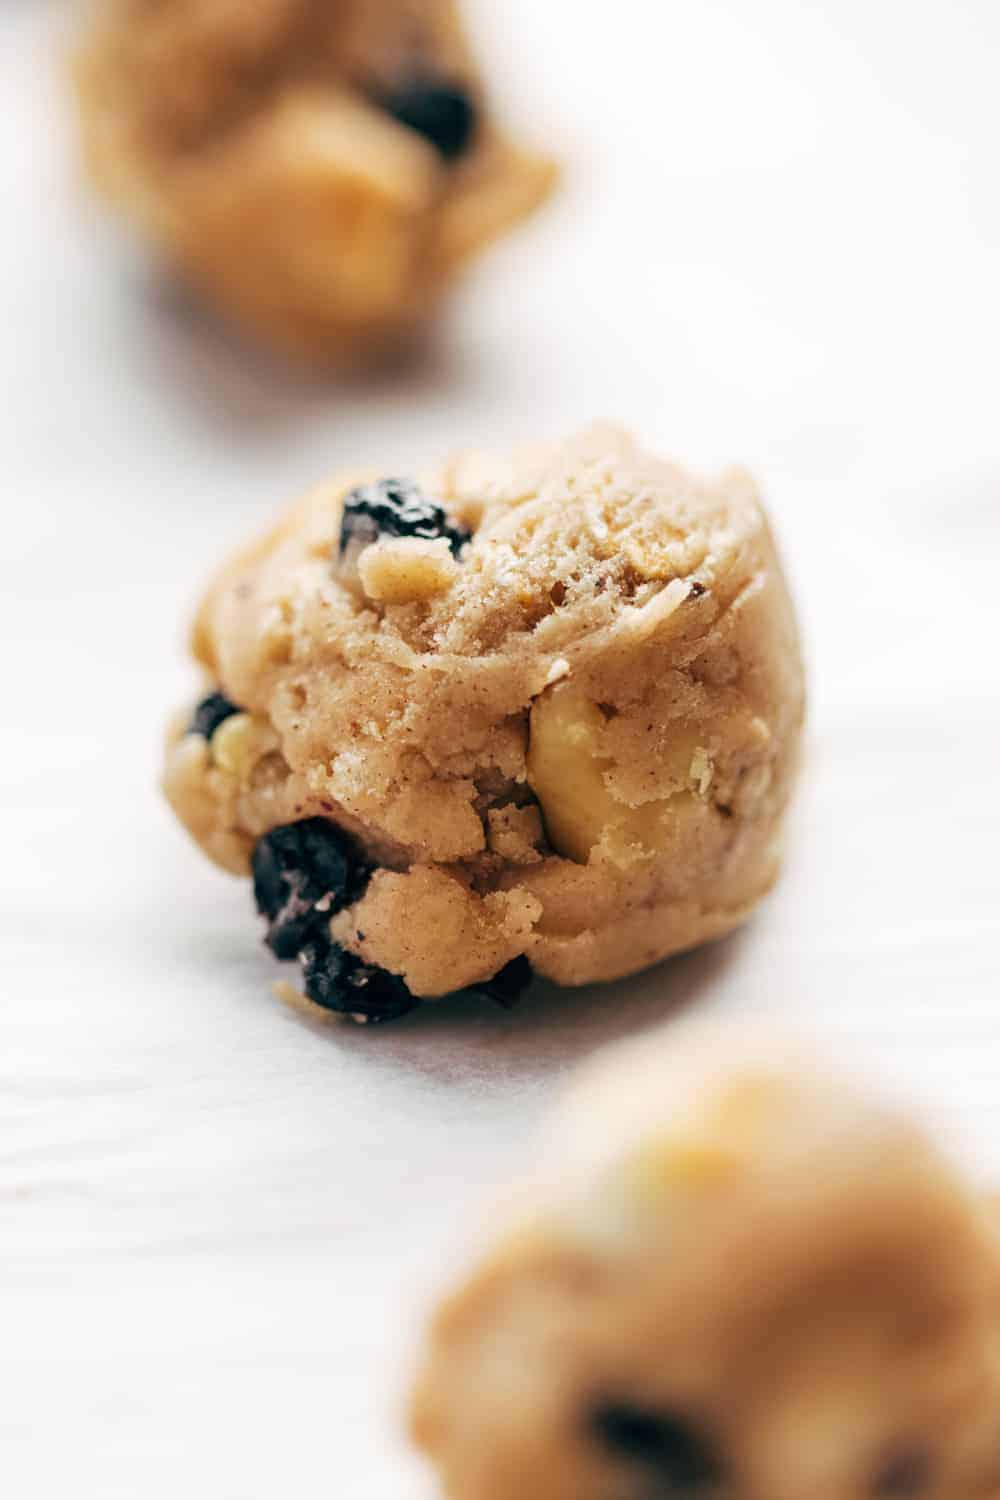 Pack your Granola Cookie dough with your favorite granola, dried fruit, nuts and chocolate. 